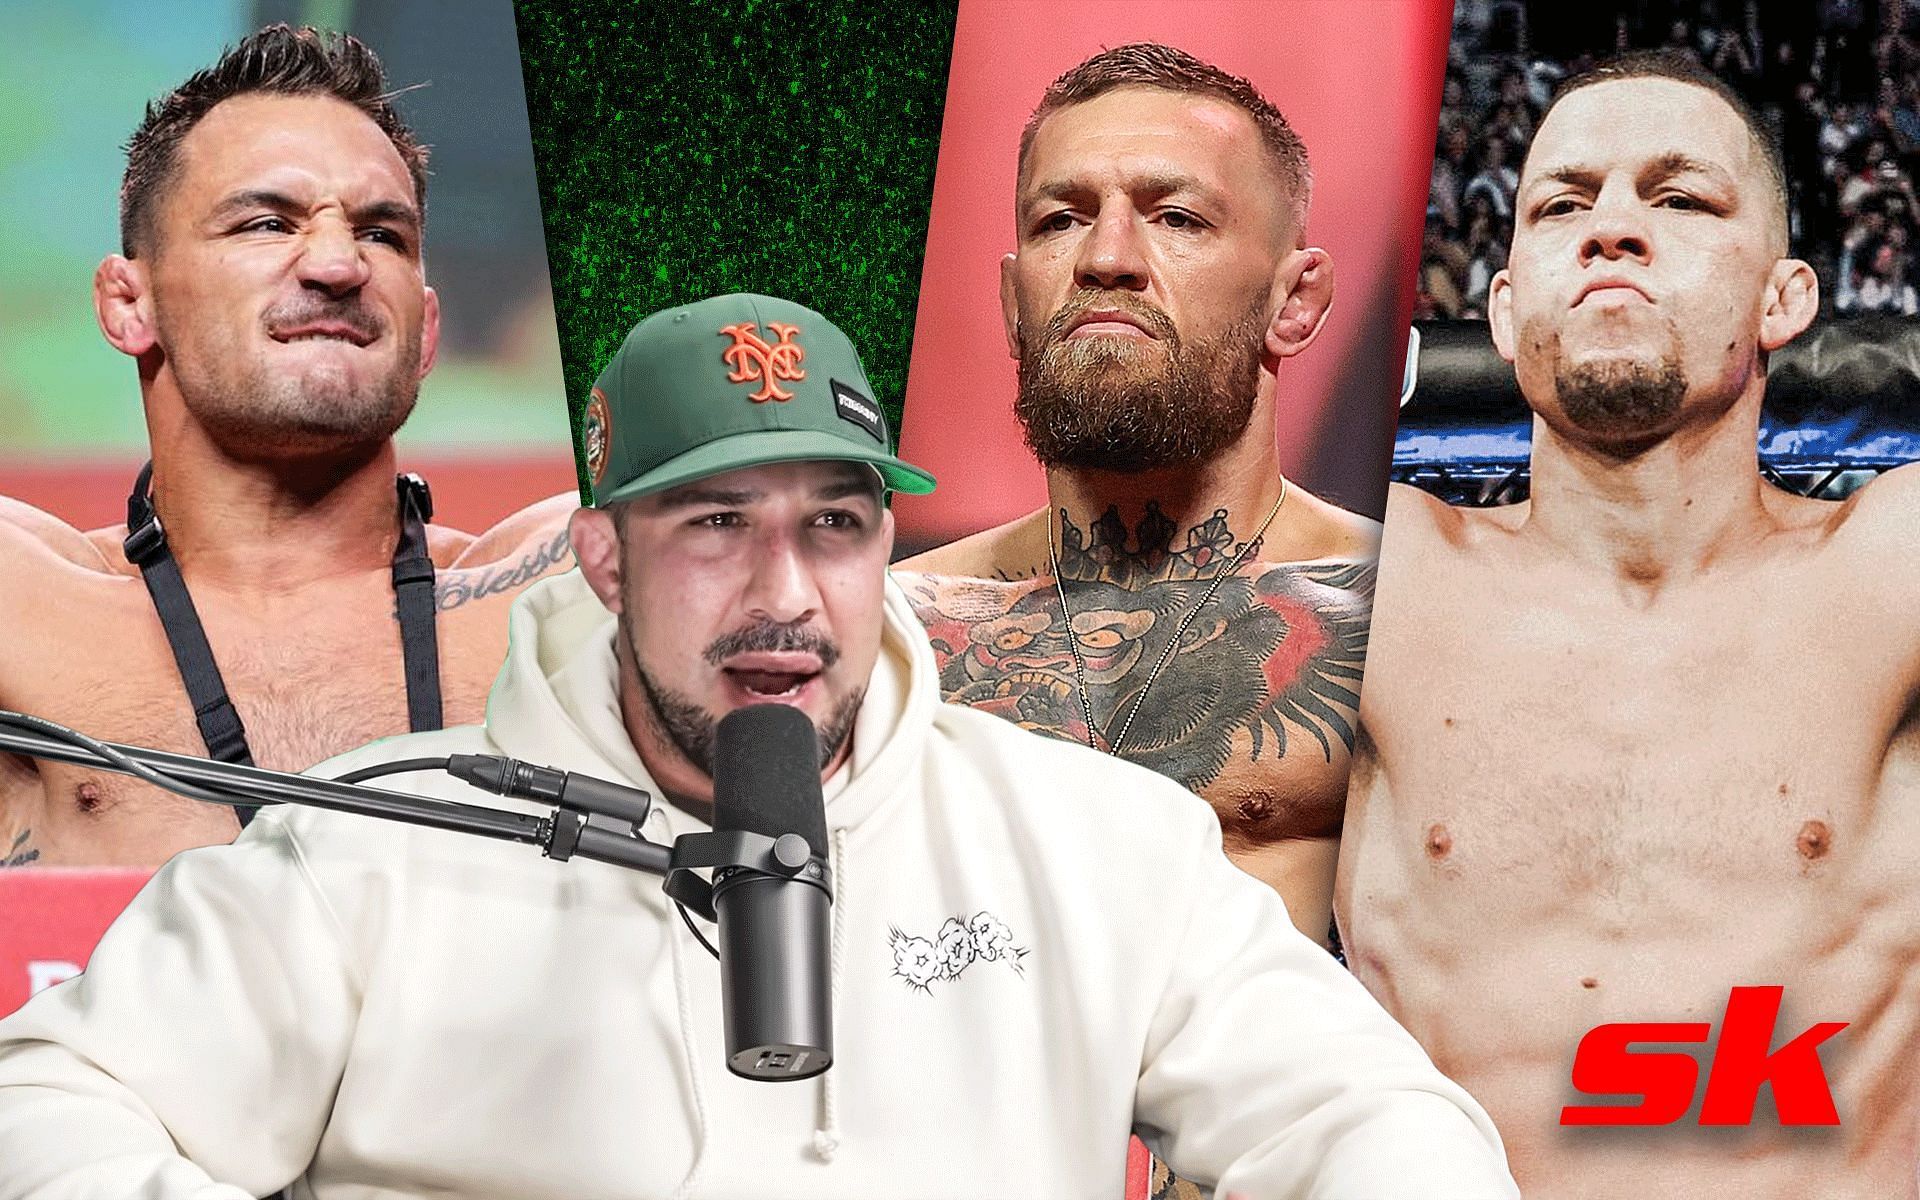 Michael Chandler (far left), Brendan Schaub (bottom left), Conor McGregor (right), Nate Diaz (far right) [Images courtesy of Thiccc Boy on YouTube and @mikechandlermma &amp; @natediaz209 on Instagram]